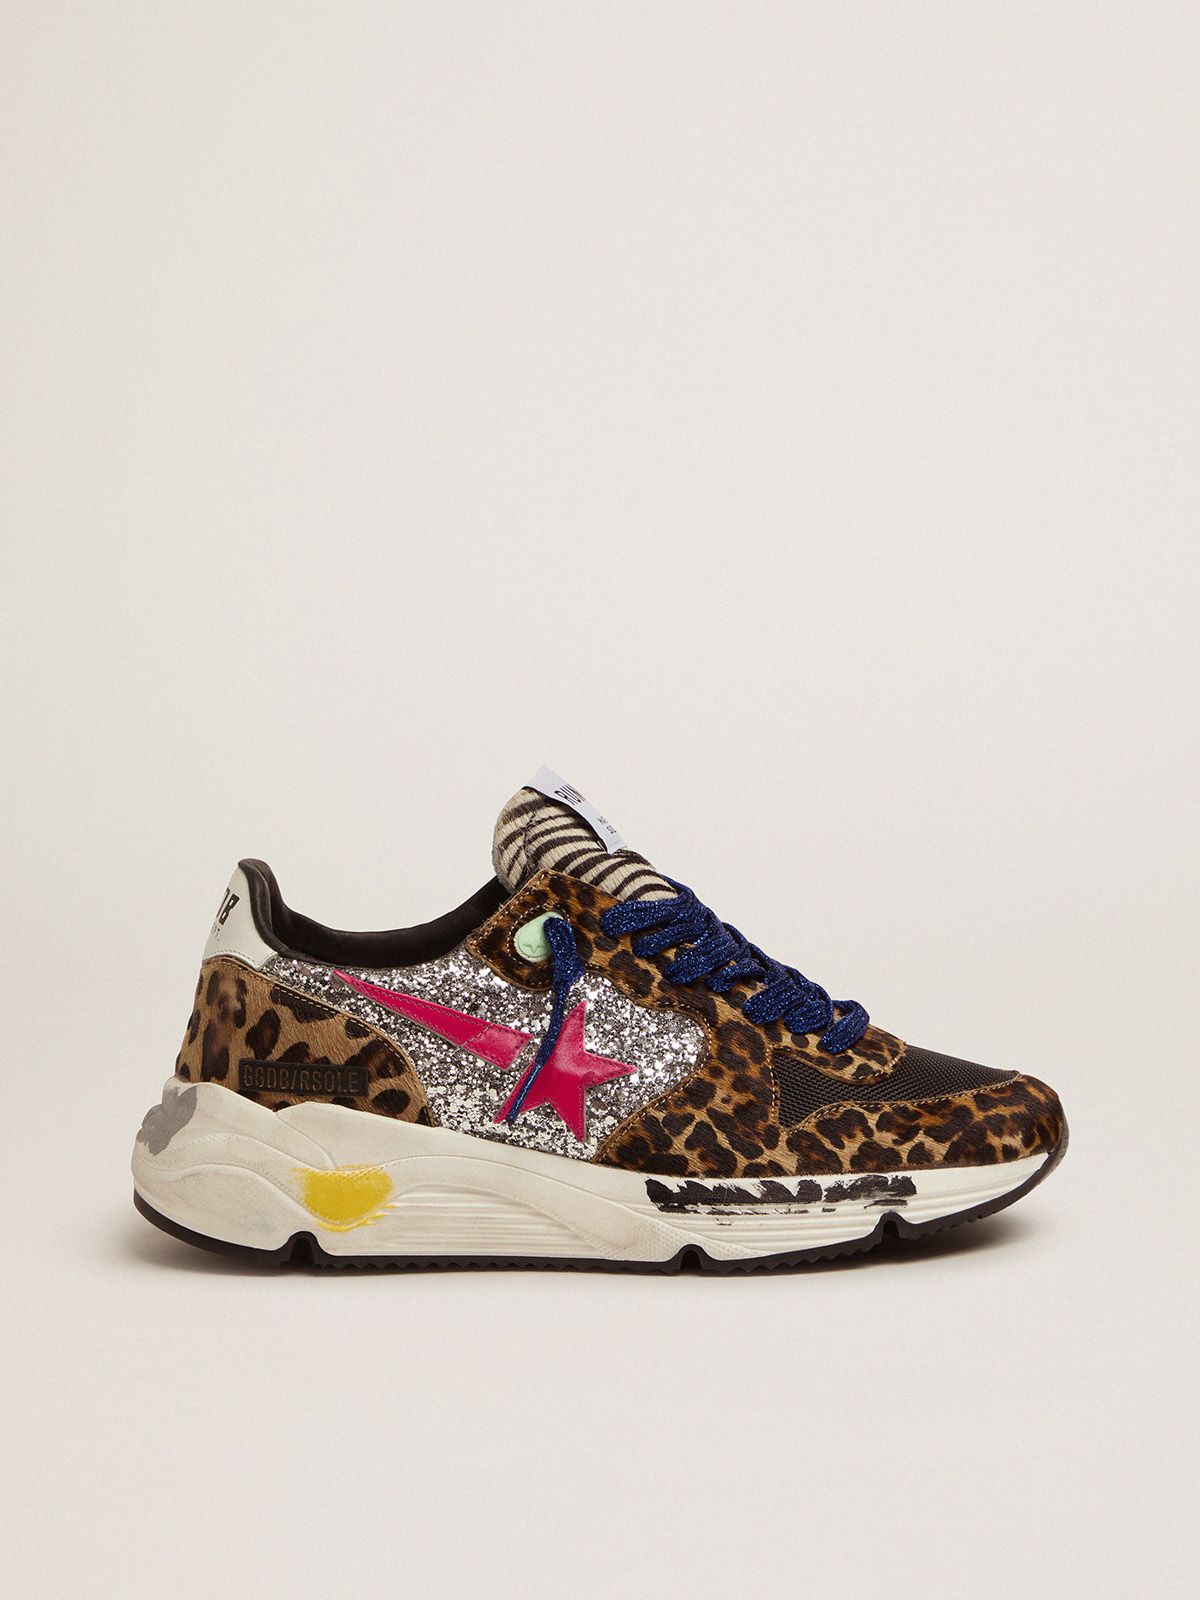 Running Sole sneakers in leopard-print pony skin with silver glitter inserts.